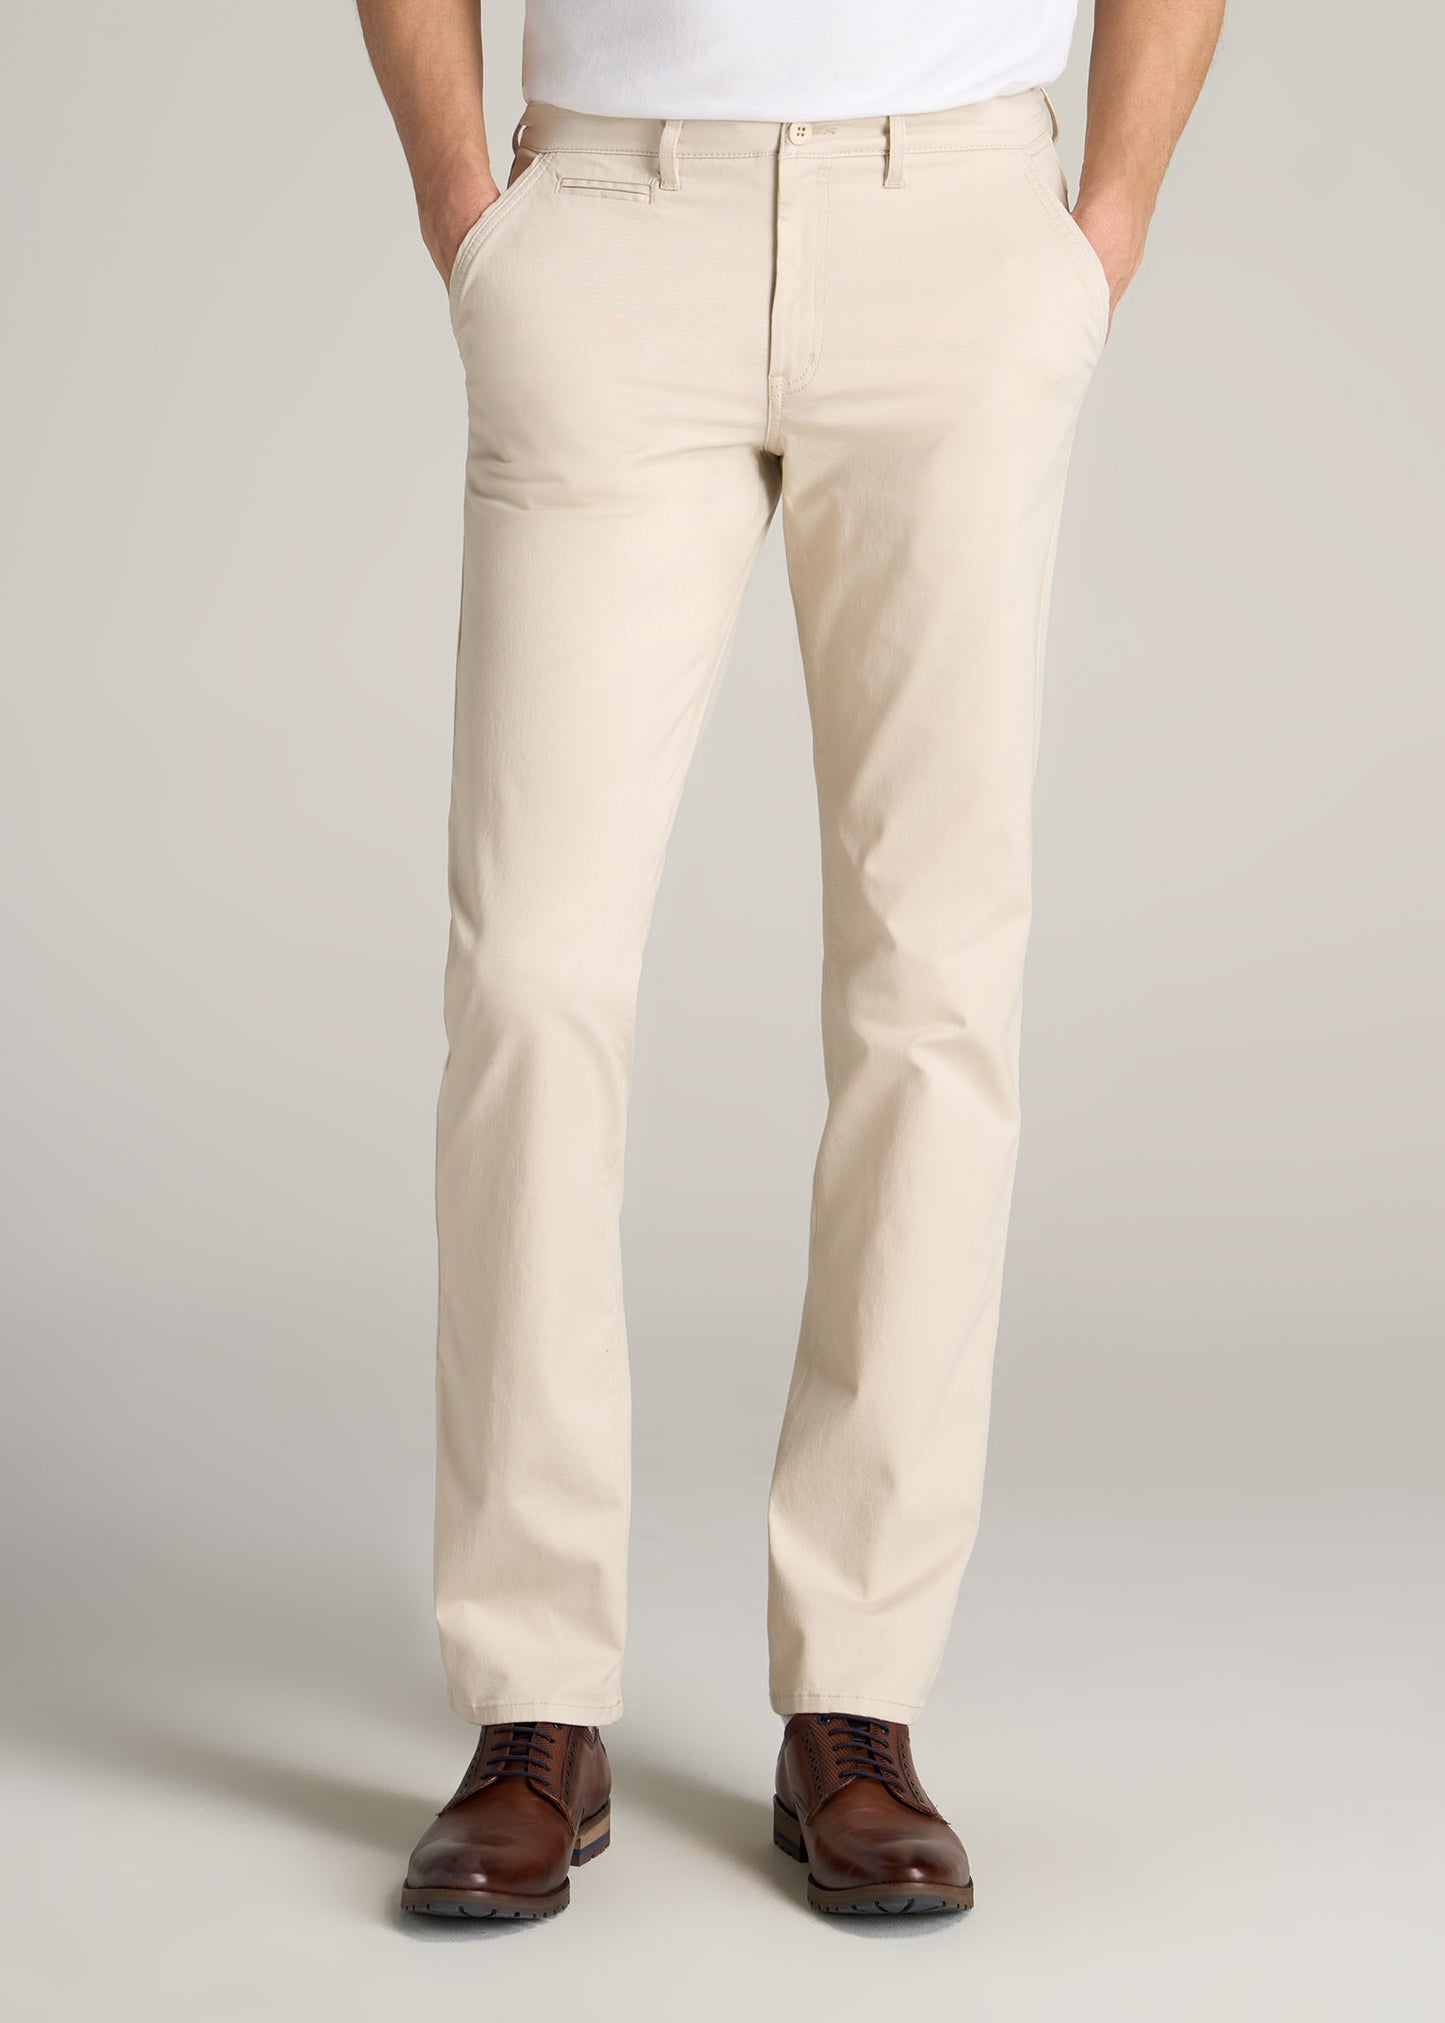 Pants adjusted fit cotton chinos for mens | Quality brand Europann